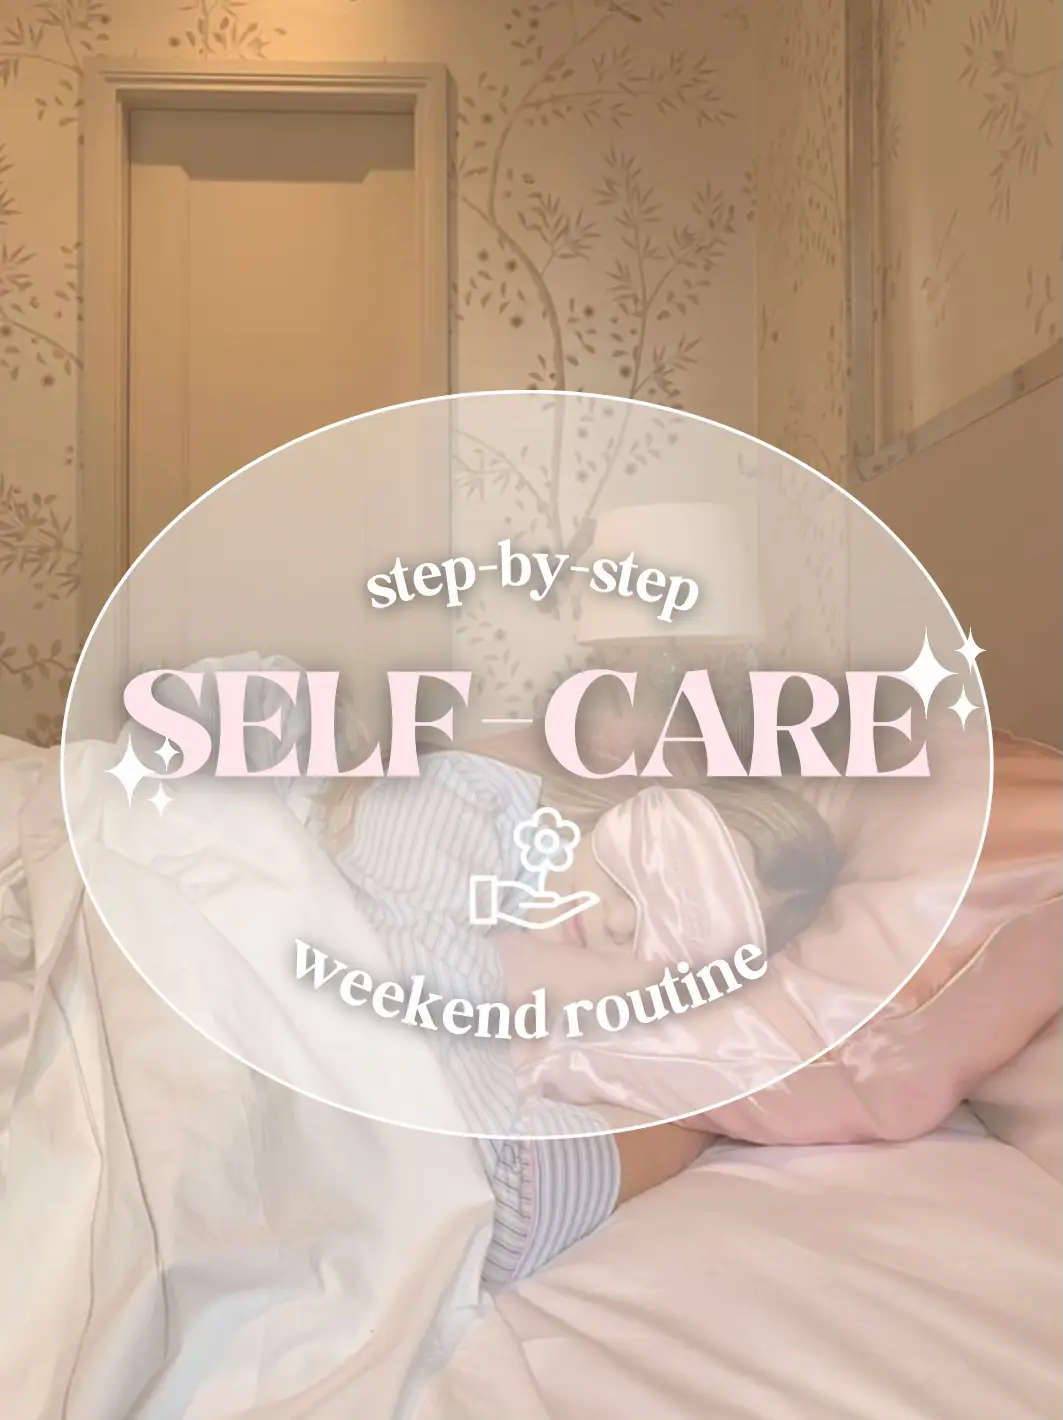  A self- care weekend routine with a step-by-step guide.